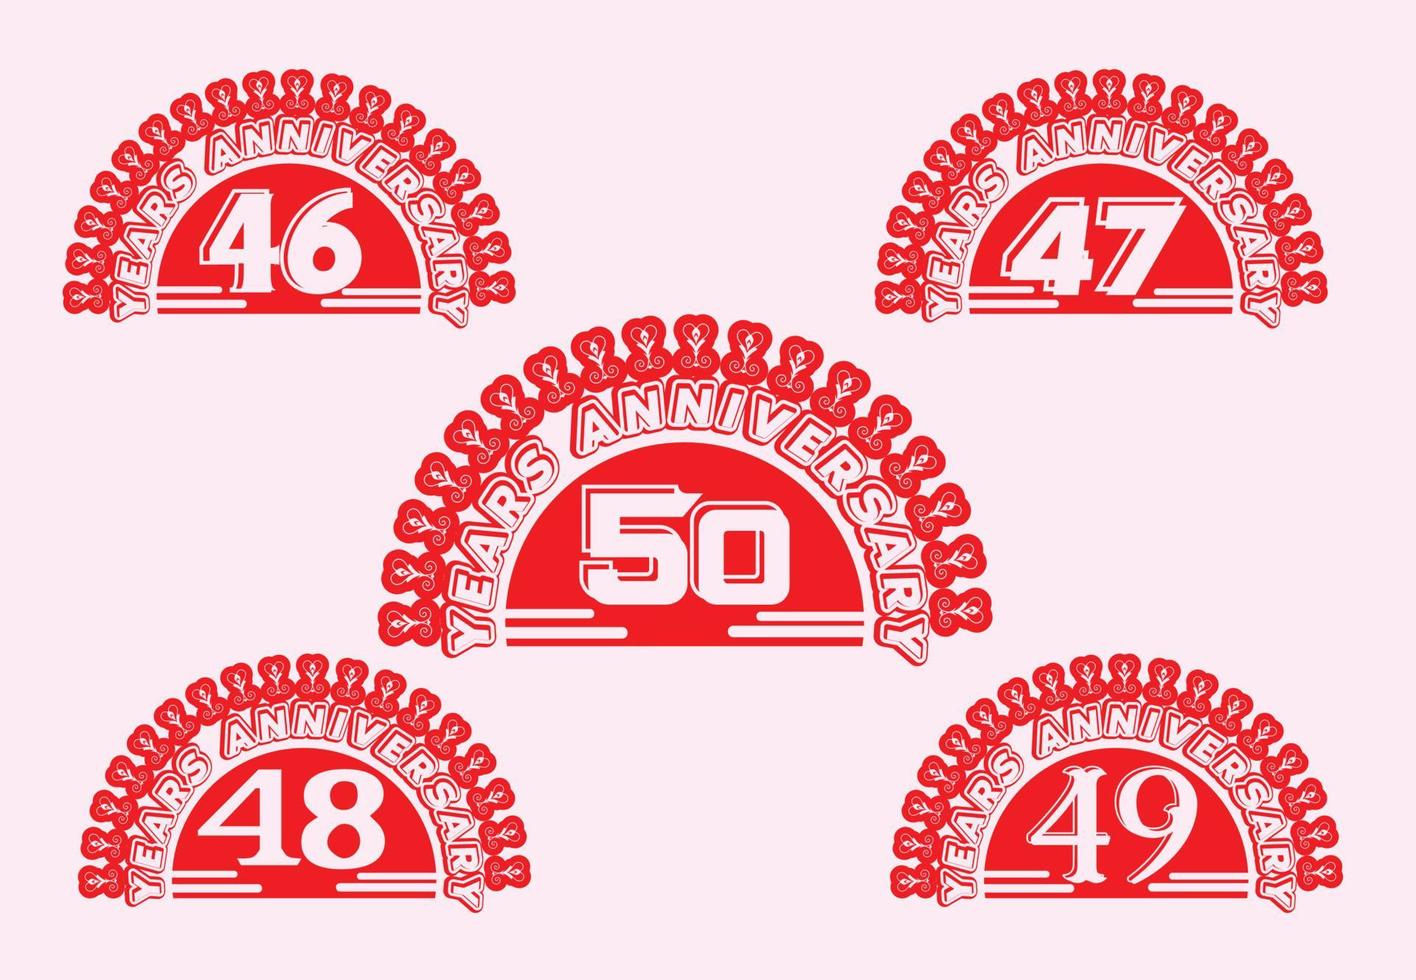 46 to 50 years anniversary logo and sticker design template vector